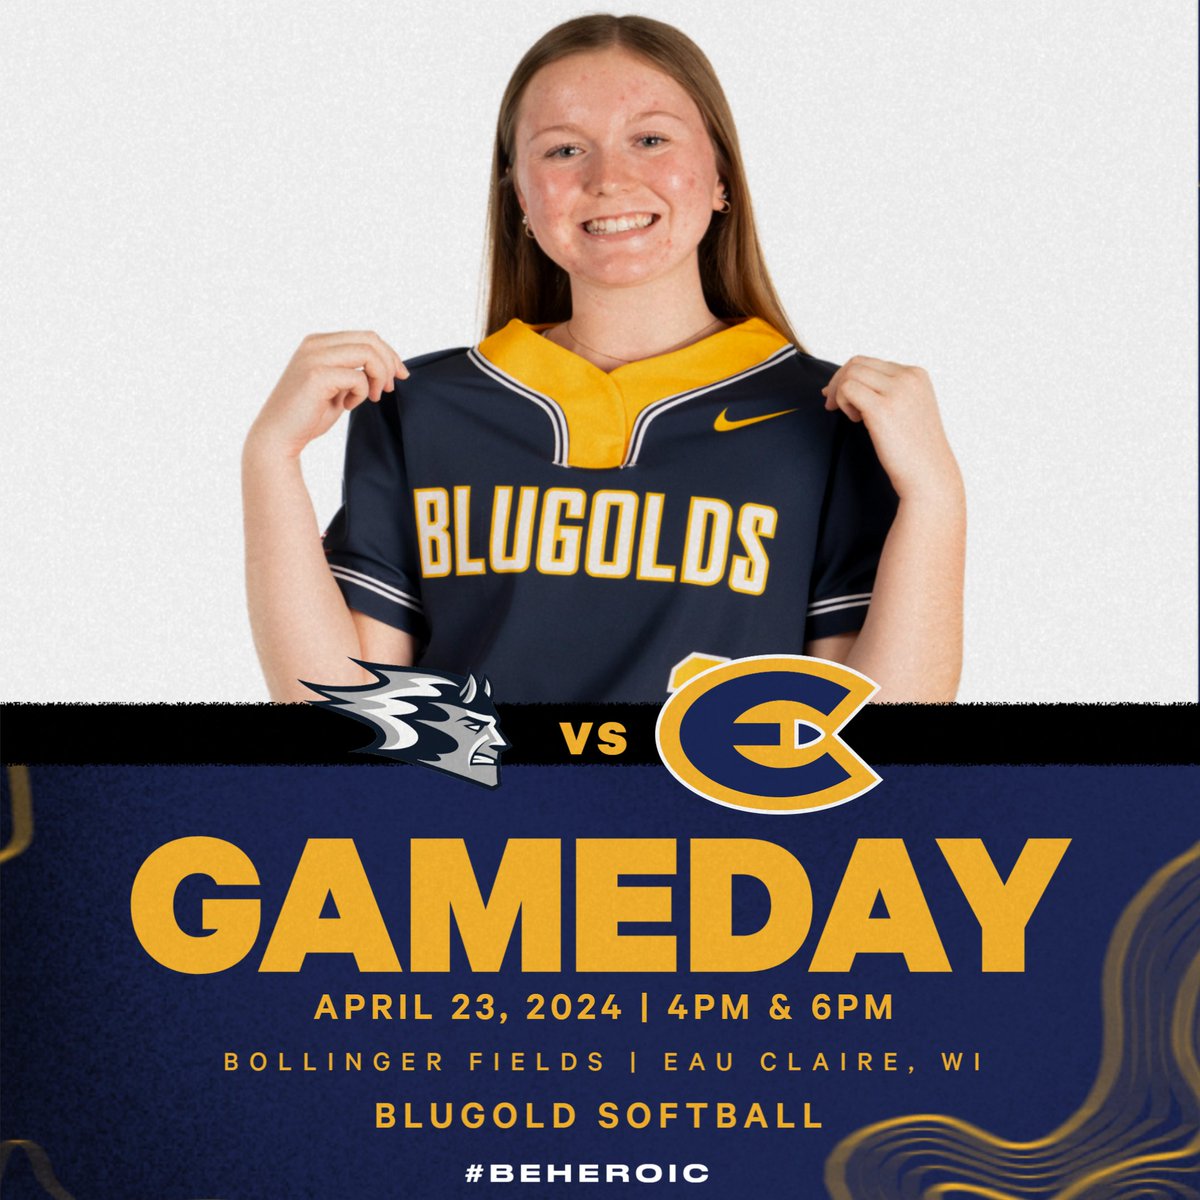 Back on the diamond for a clash with the Blue Devils! 🥎 Join us at Bollinger or follow along at blugolds.com! #RollGolds #BeHeroic